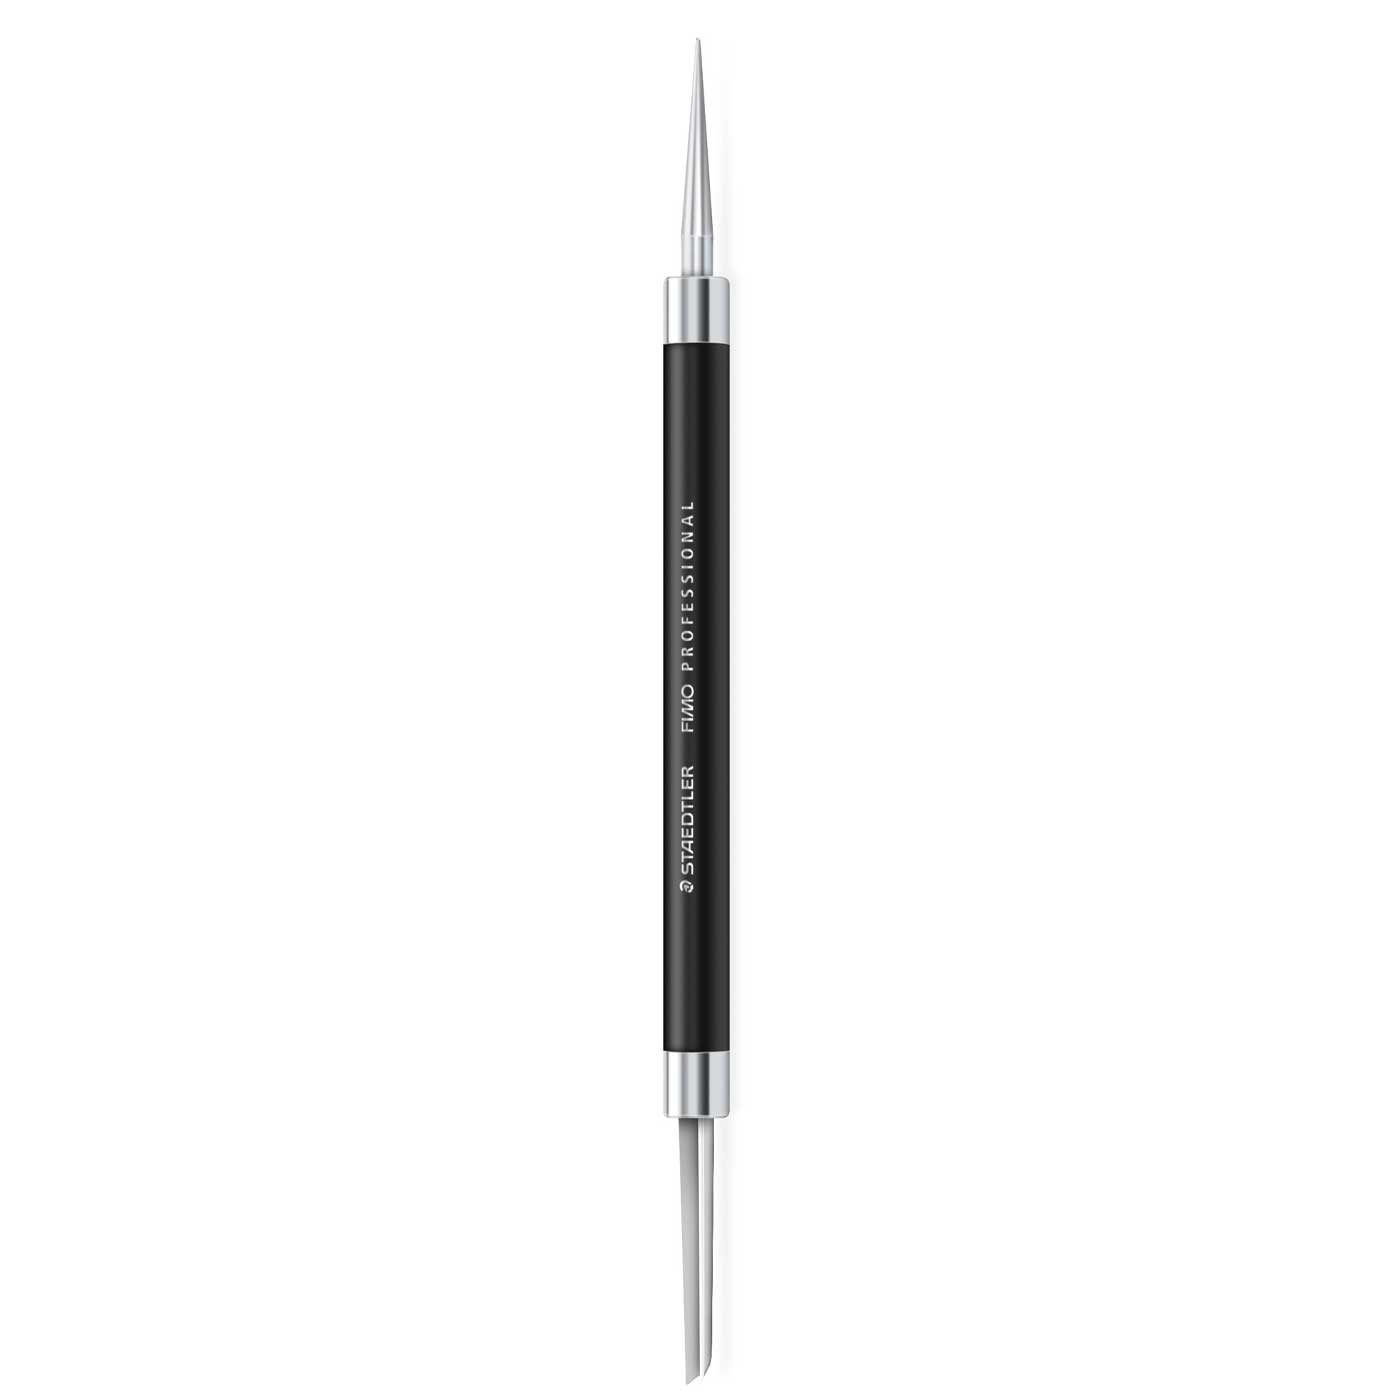 Staedtler FIMO Clay Modelling Professional Needle & V Tool 8711 04 Black